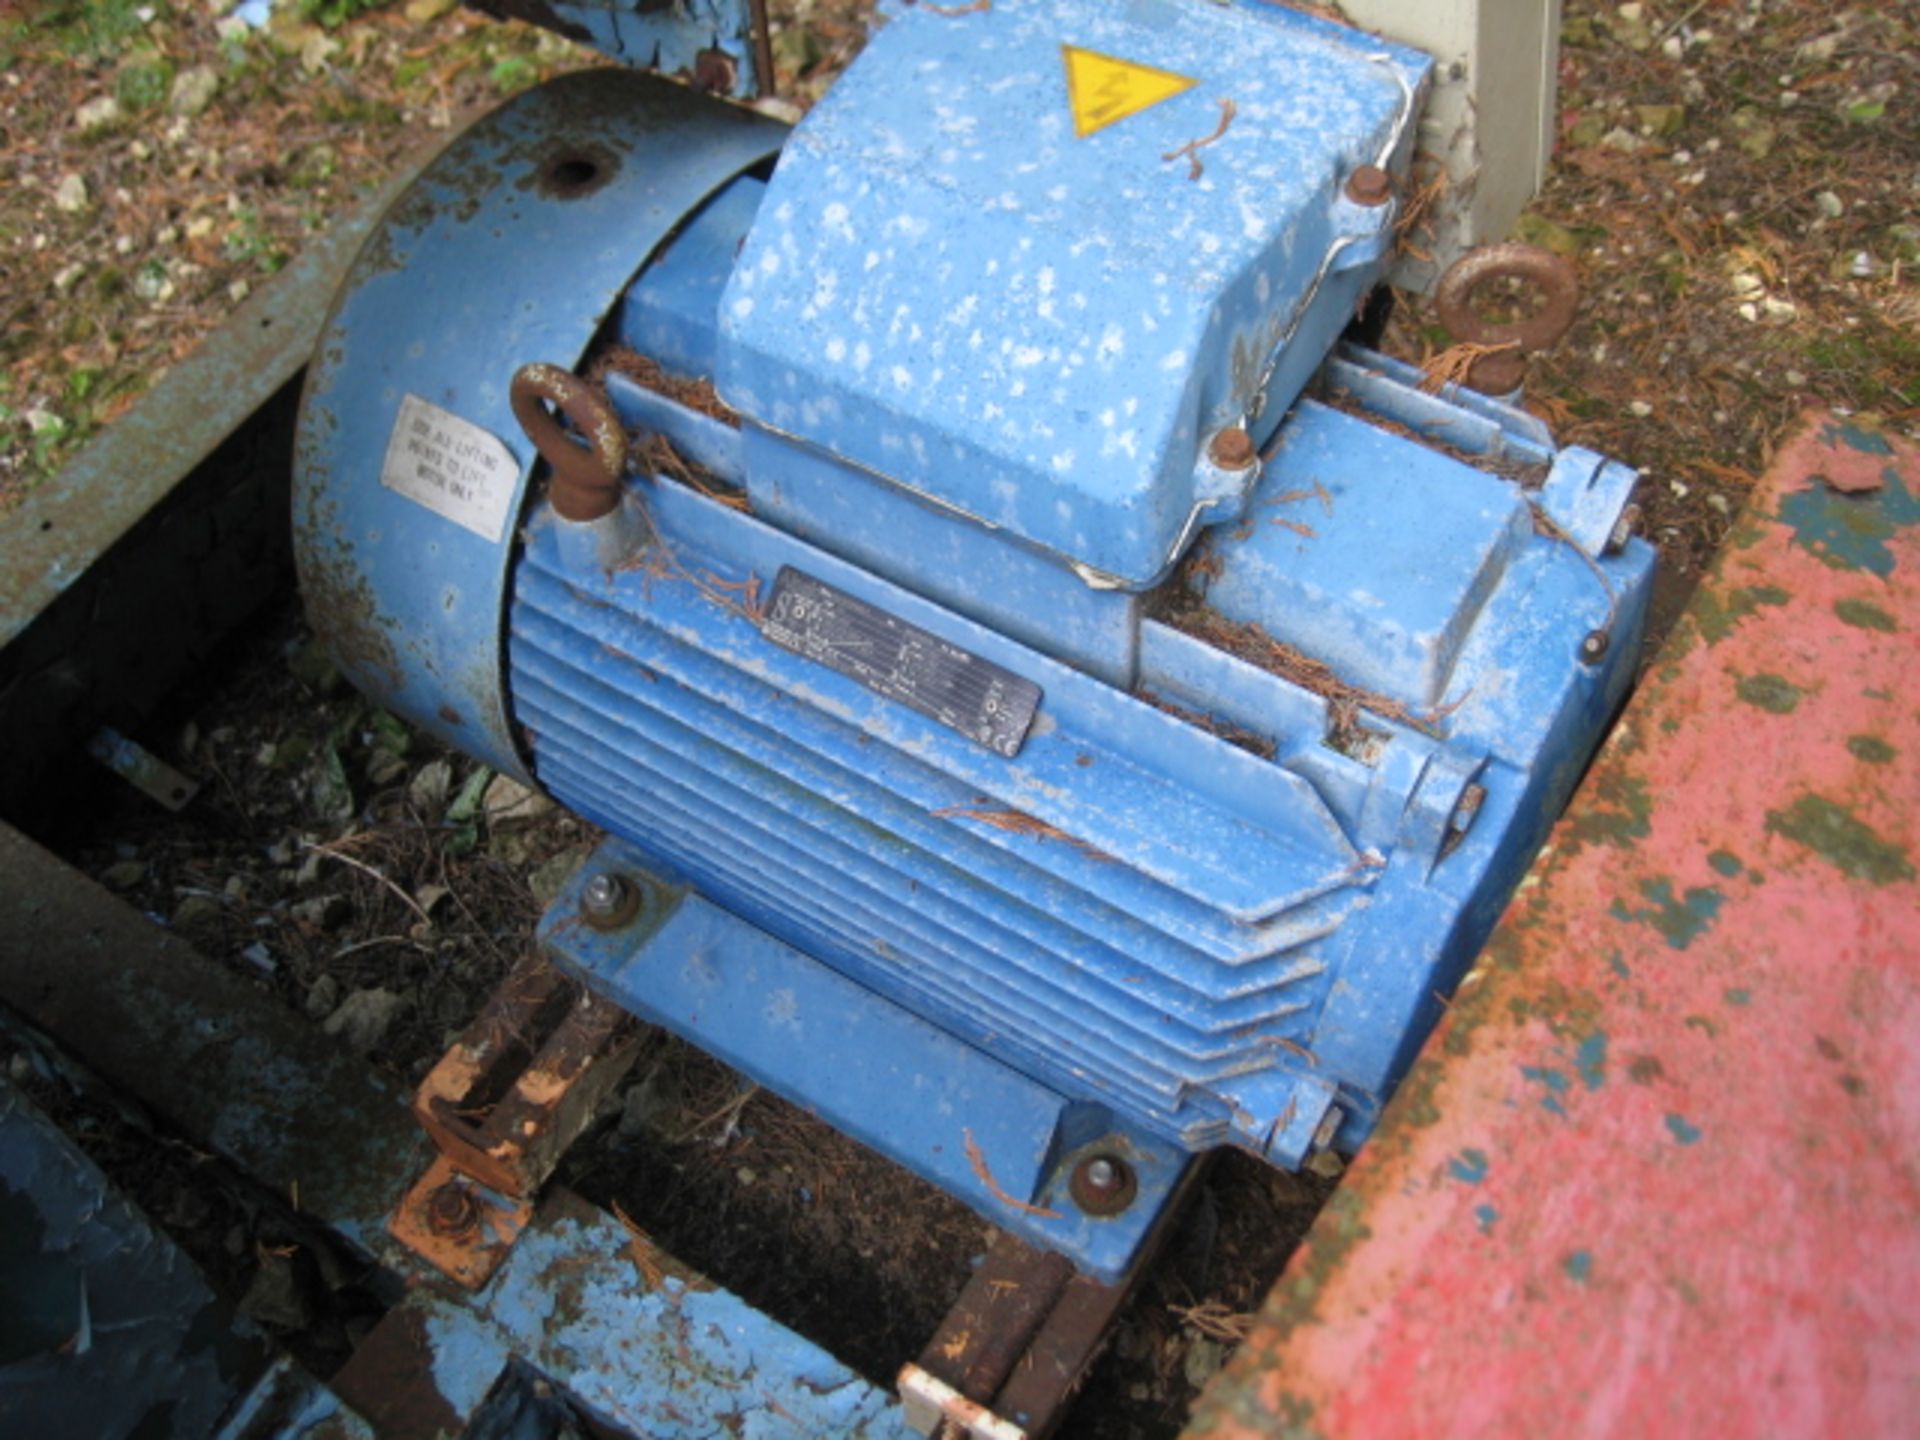 Provenair centrifugal belt driven fan model 30B Size C75 with 30kw motor. Lot located at Navenby, - Image 4 of 5